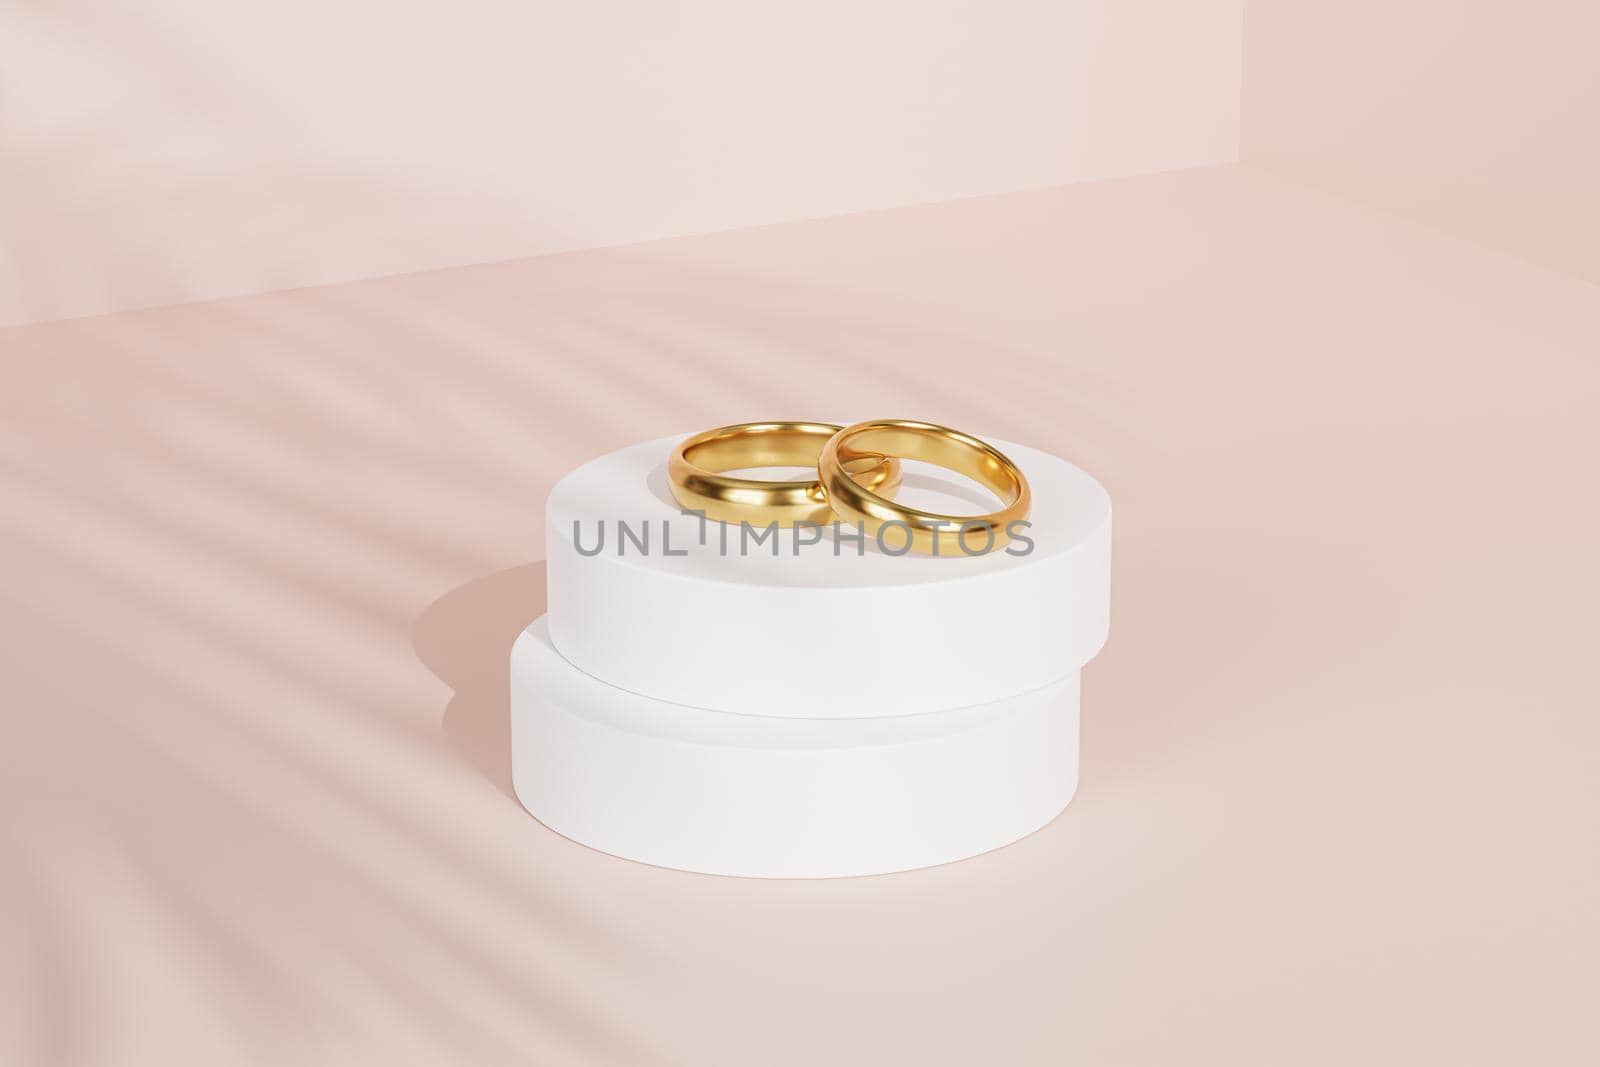 Two golden wedding rings on white podium or pedestal, beige background with tropical leaf shadow, 3d render